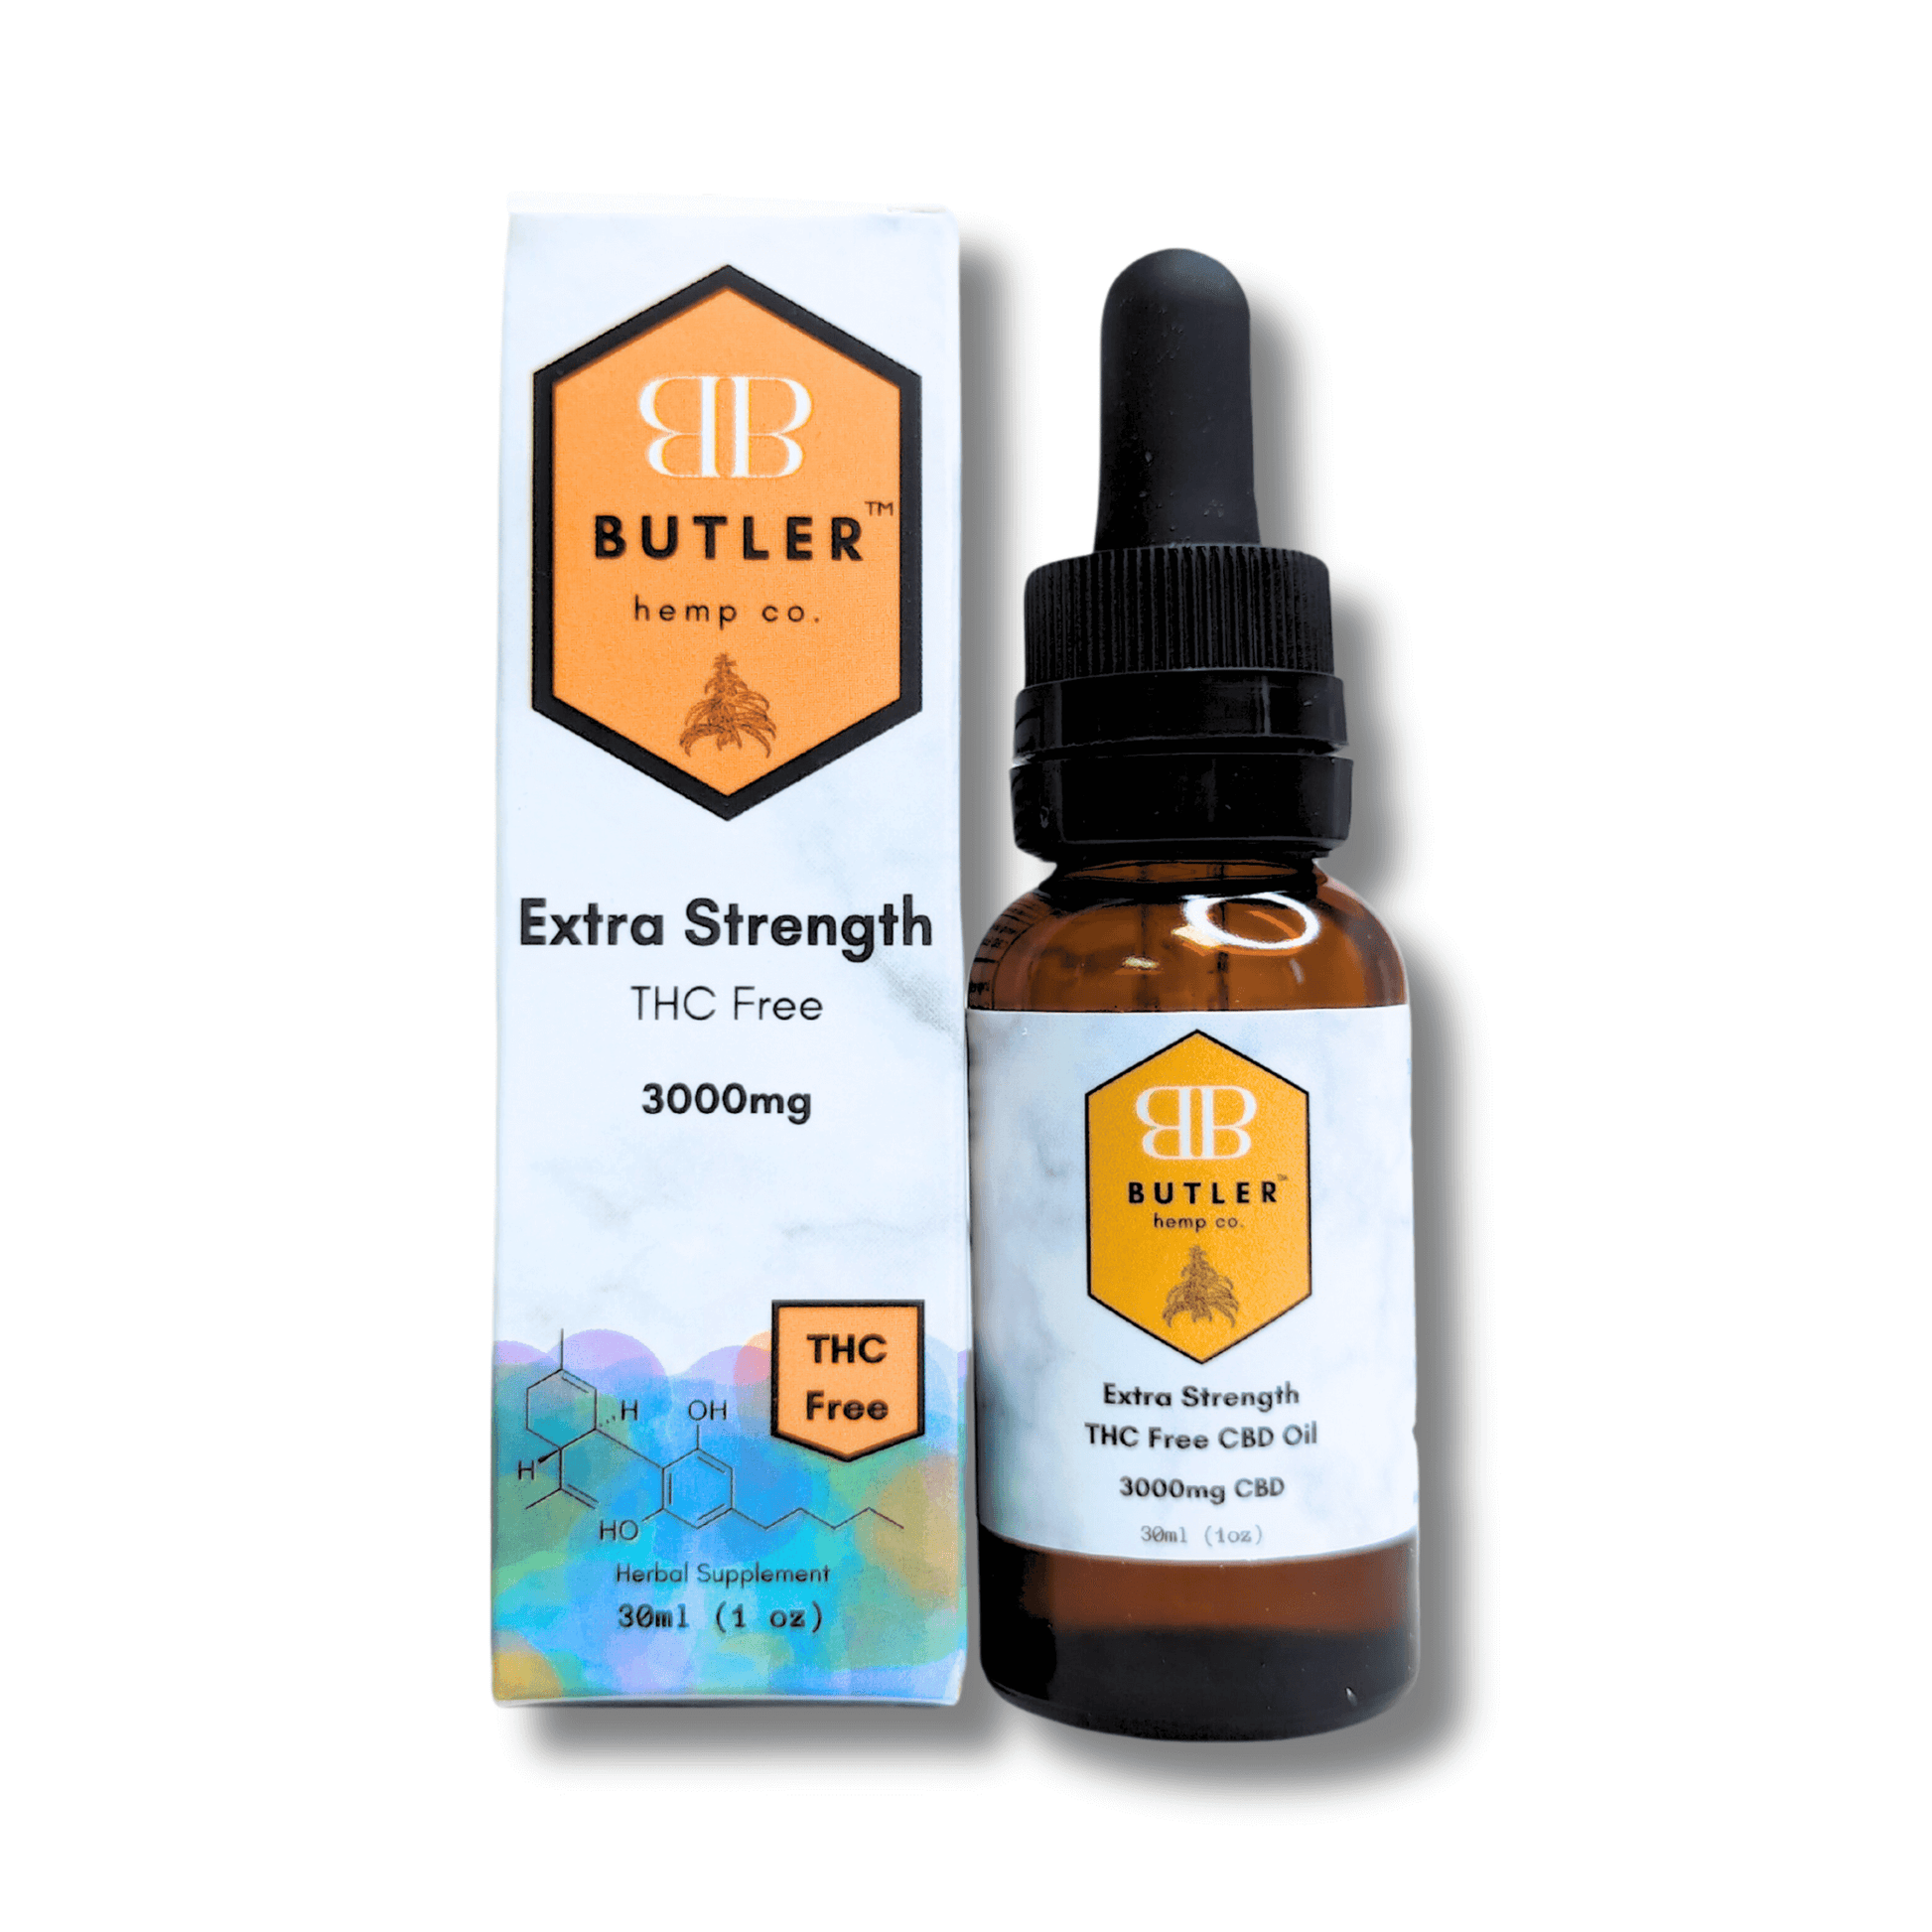 Even though we recommend a full spectrum product whenever possible because of the advantageous "entourage effect", a THC free tincture still has many benefits and can be helpful for easing tension and stress, calming anxiety, and helping you get a better night's rest.